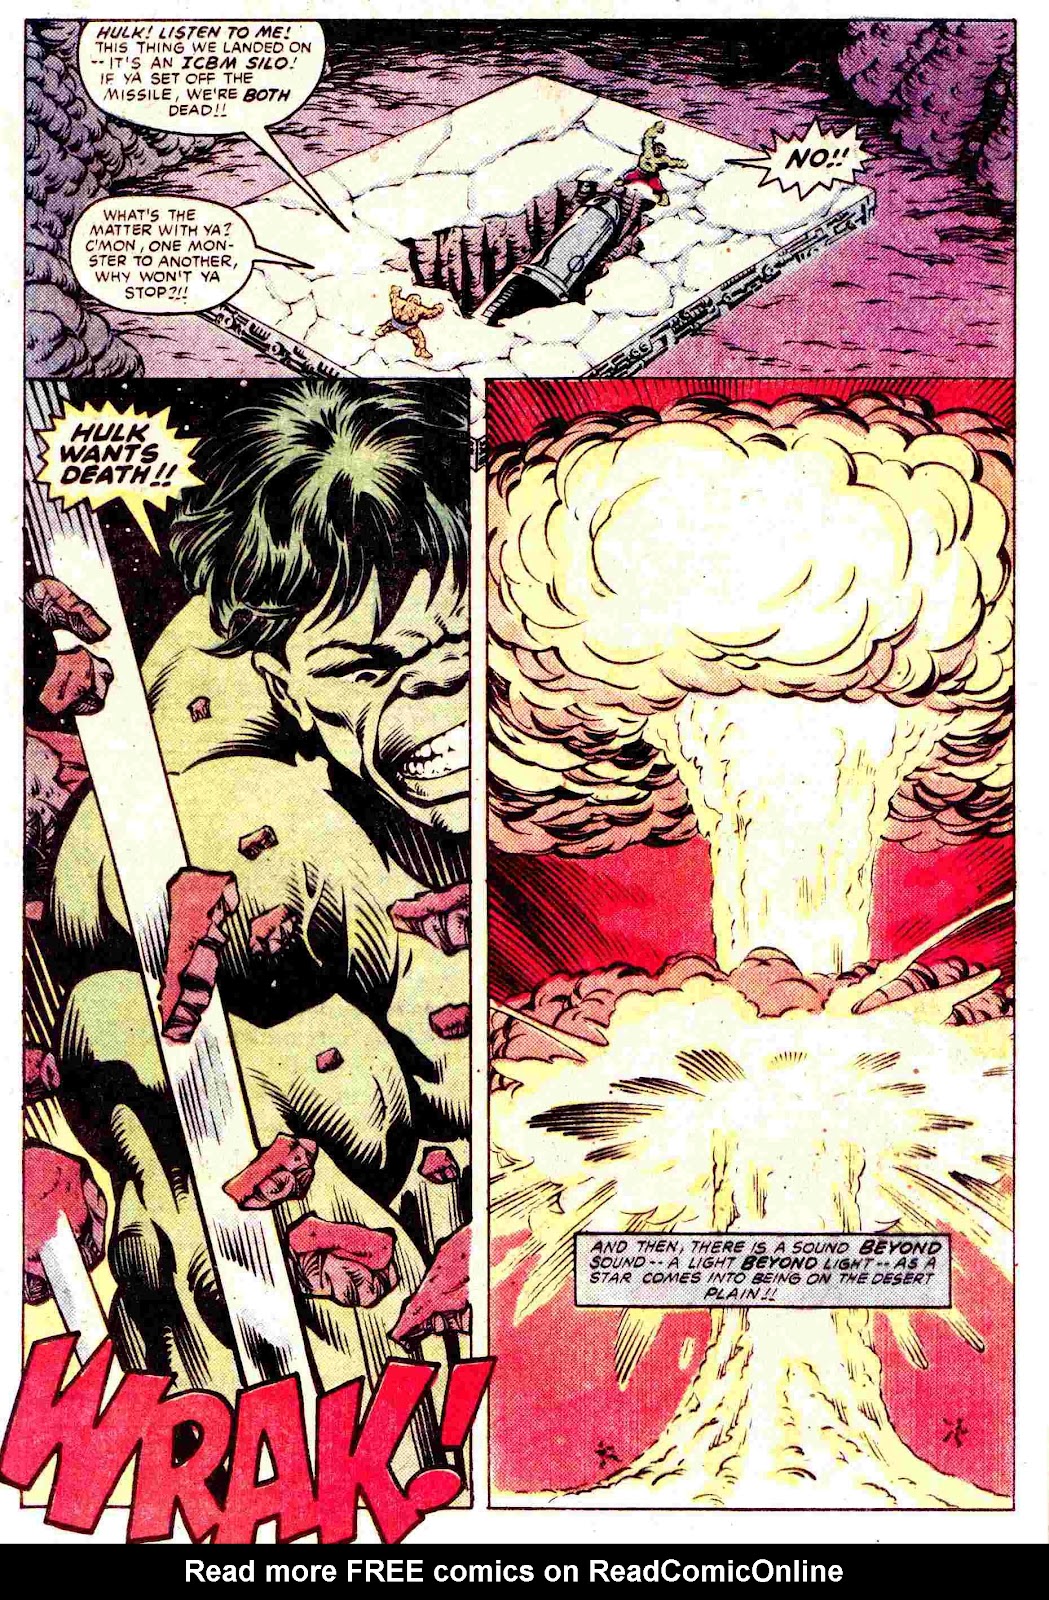 What If? (1977) issue 45 - The Hulk went Berserk - Page 34